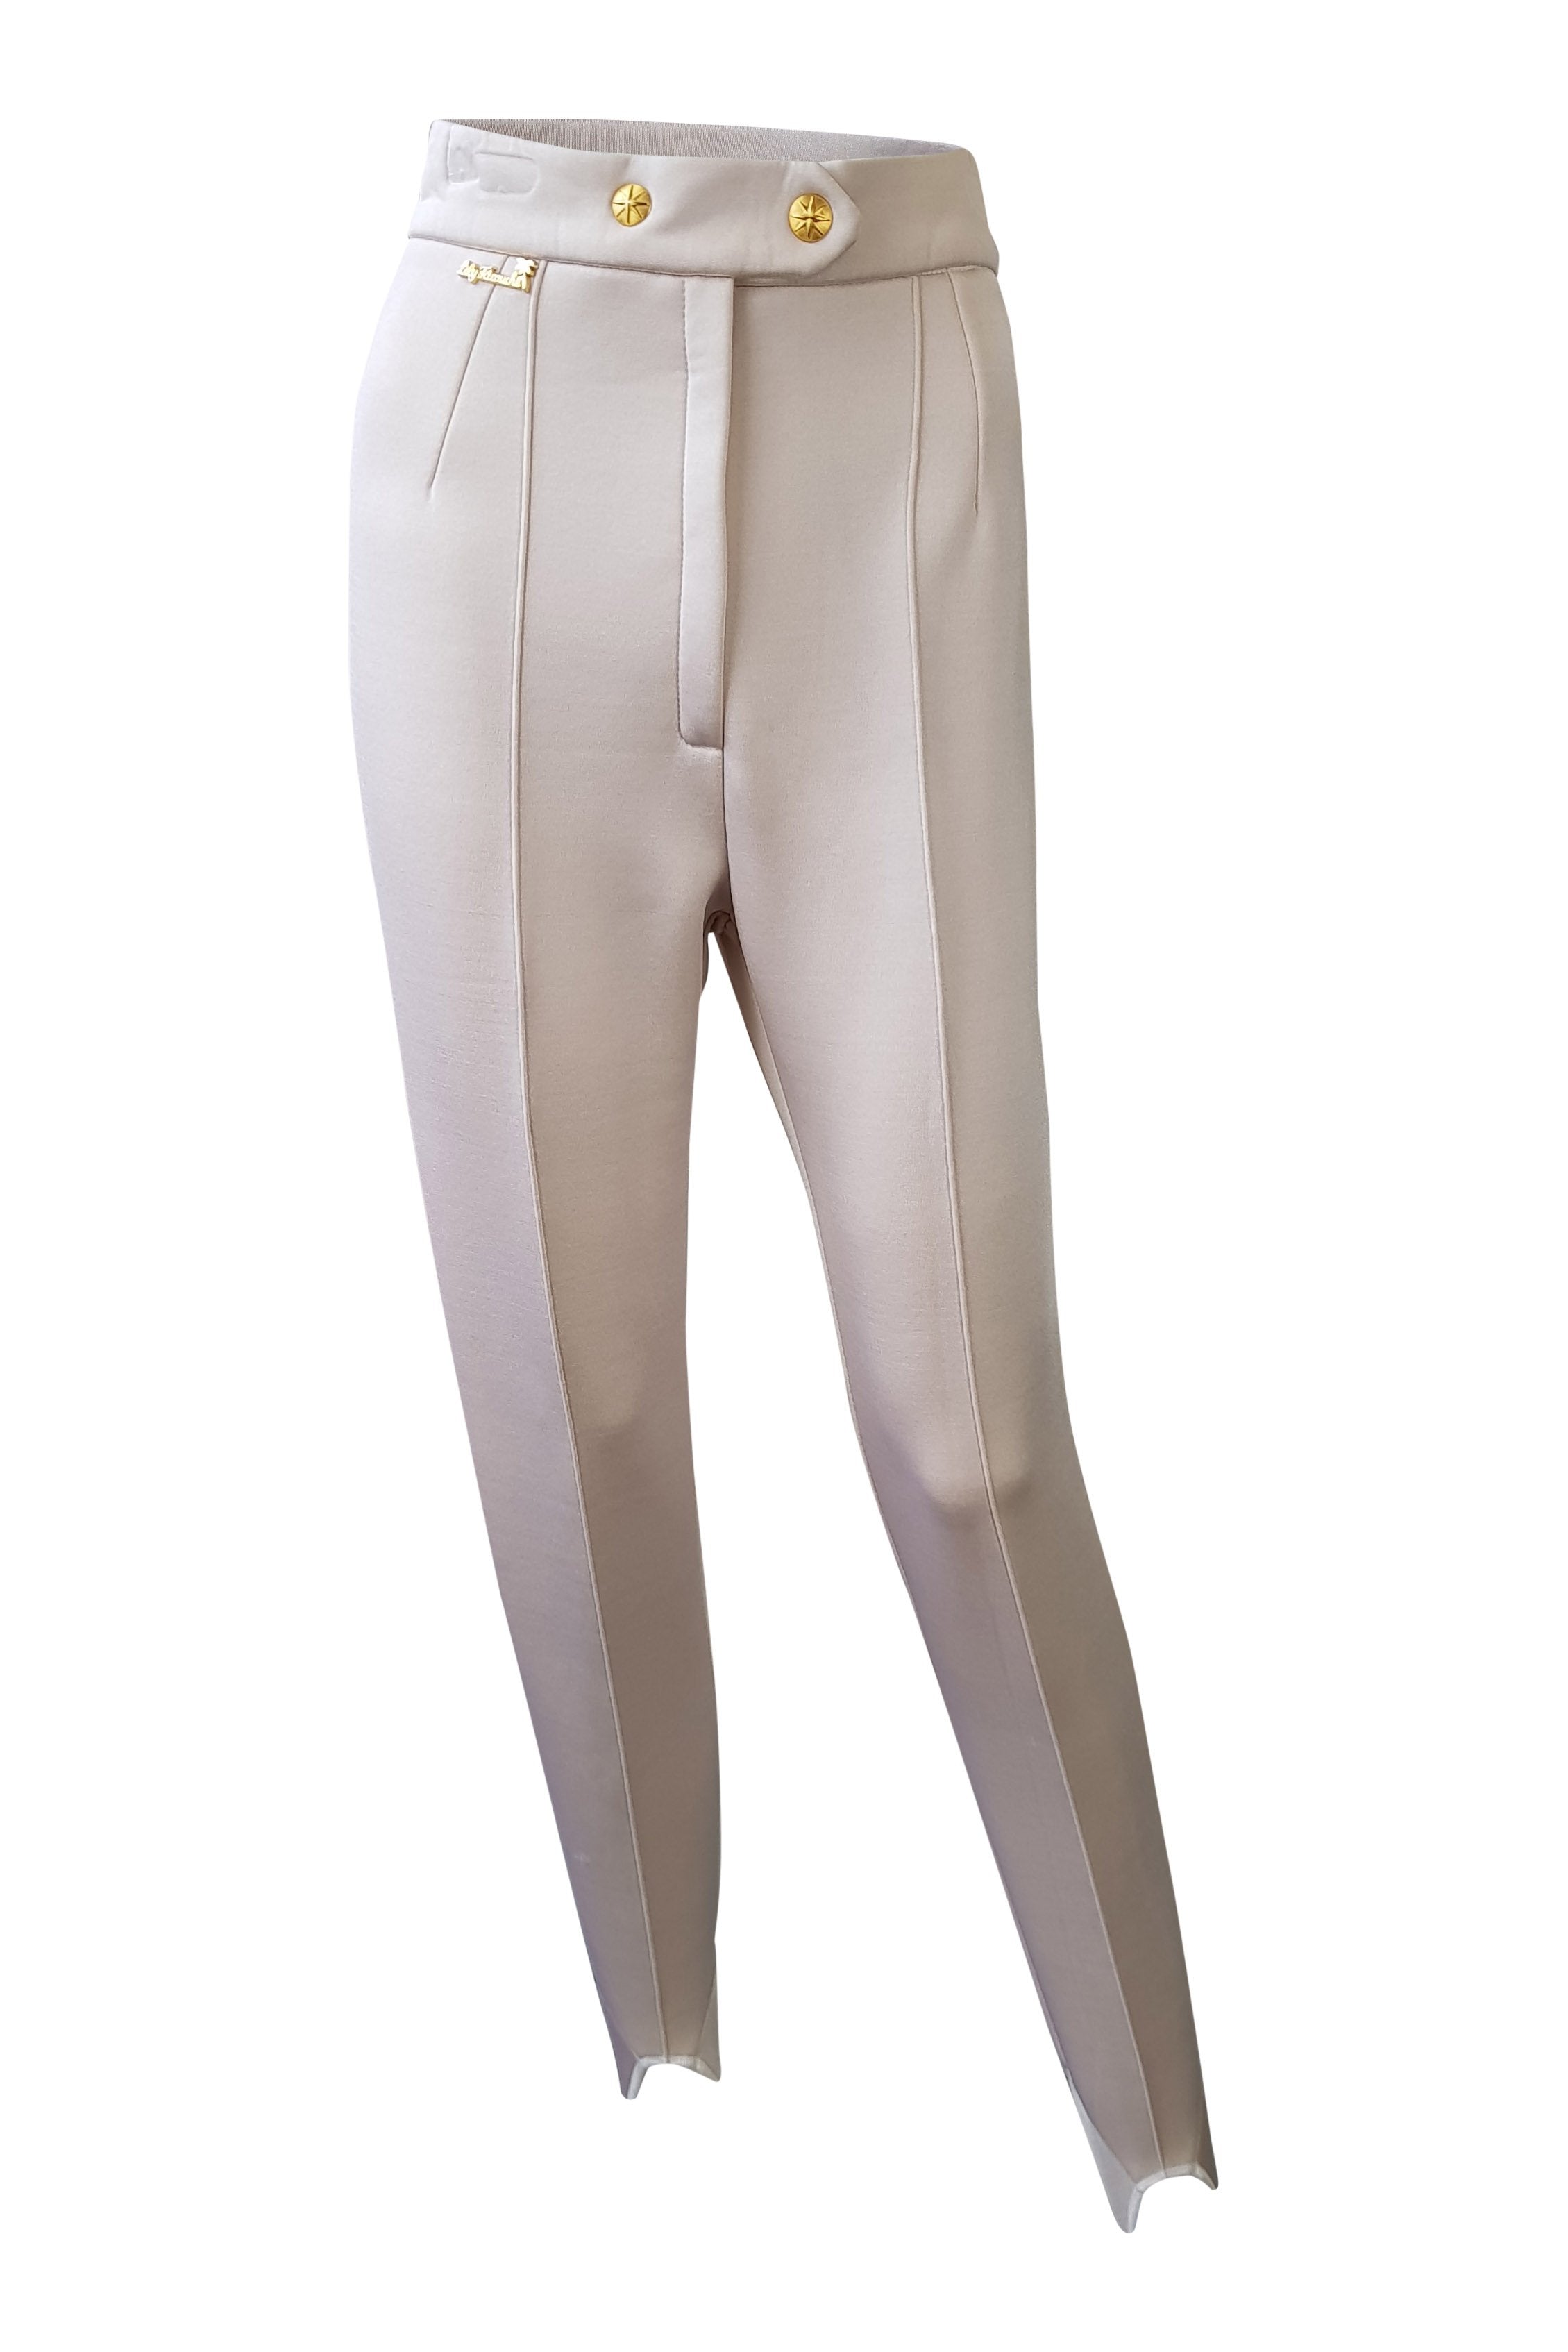 LILY FAROUCHE Frosted Pink High Waist Jodhpurs (S)-Lily Farouche-The Freperie